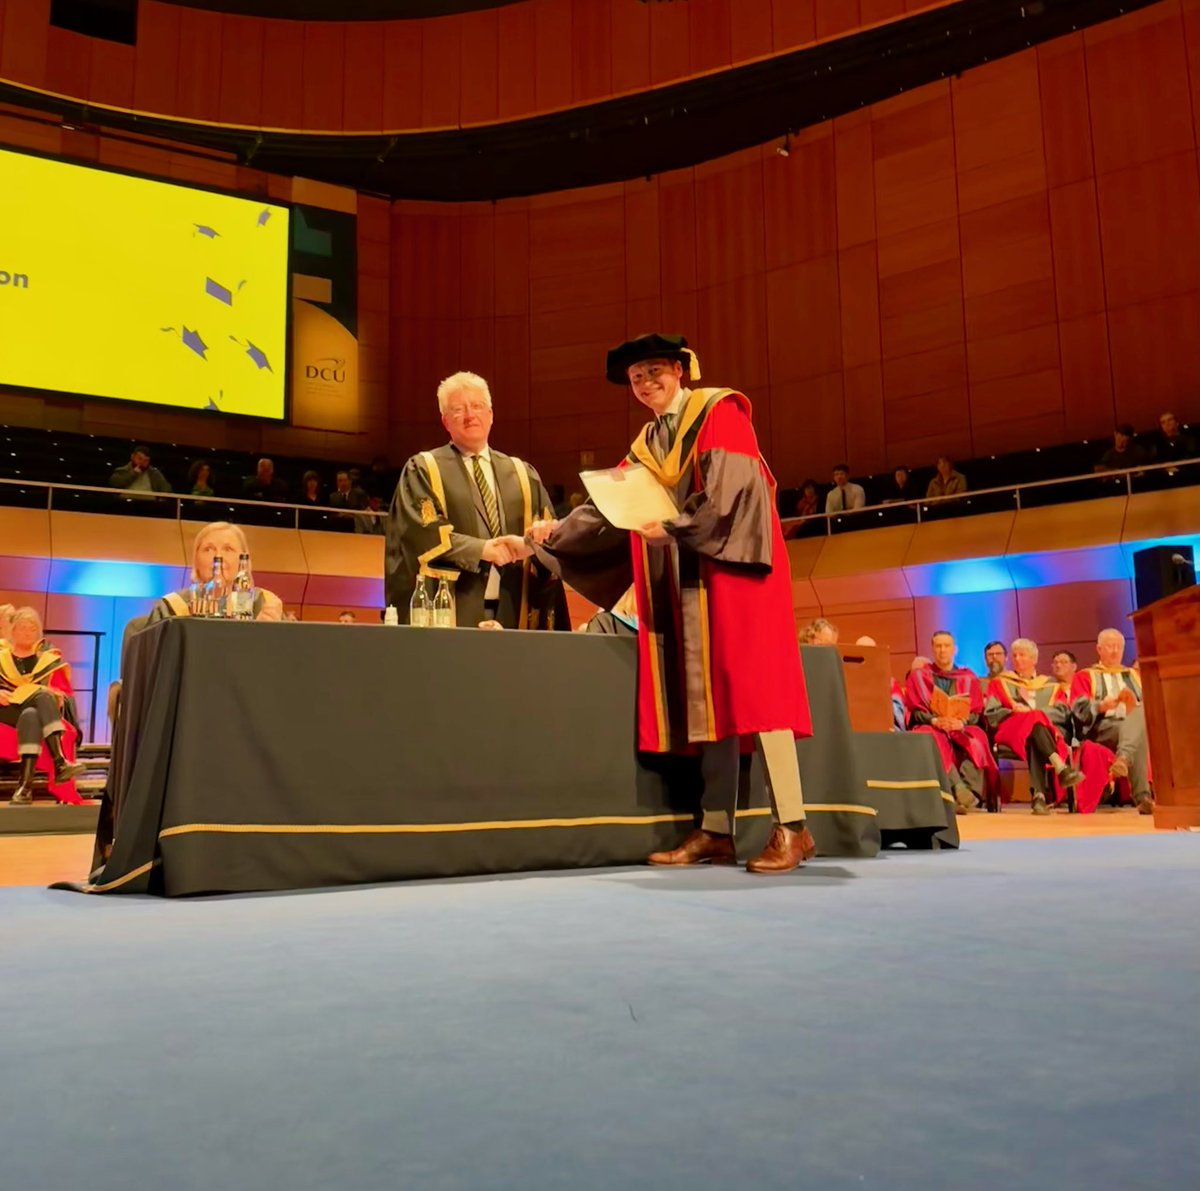 Excited to announce that I officially graduated last week from @DCU’s @LawGovDCU with a PhD in European Law! Grateful for the unwavering support from my supervisor, family, colleagues & friends over the past 4 years. Couldn't have done it without you all! On to the next chapter!